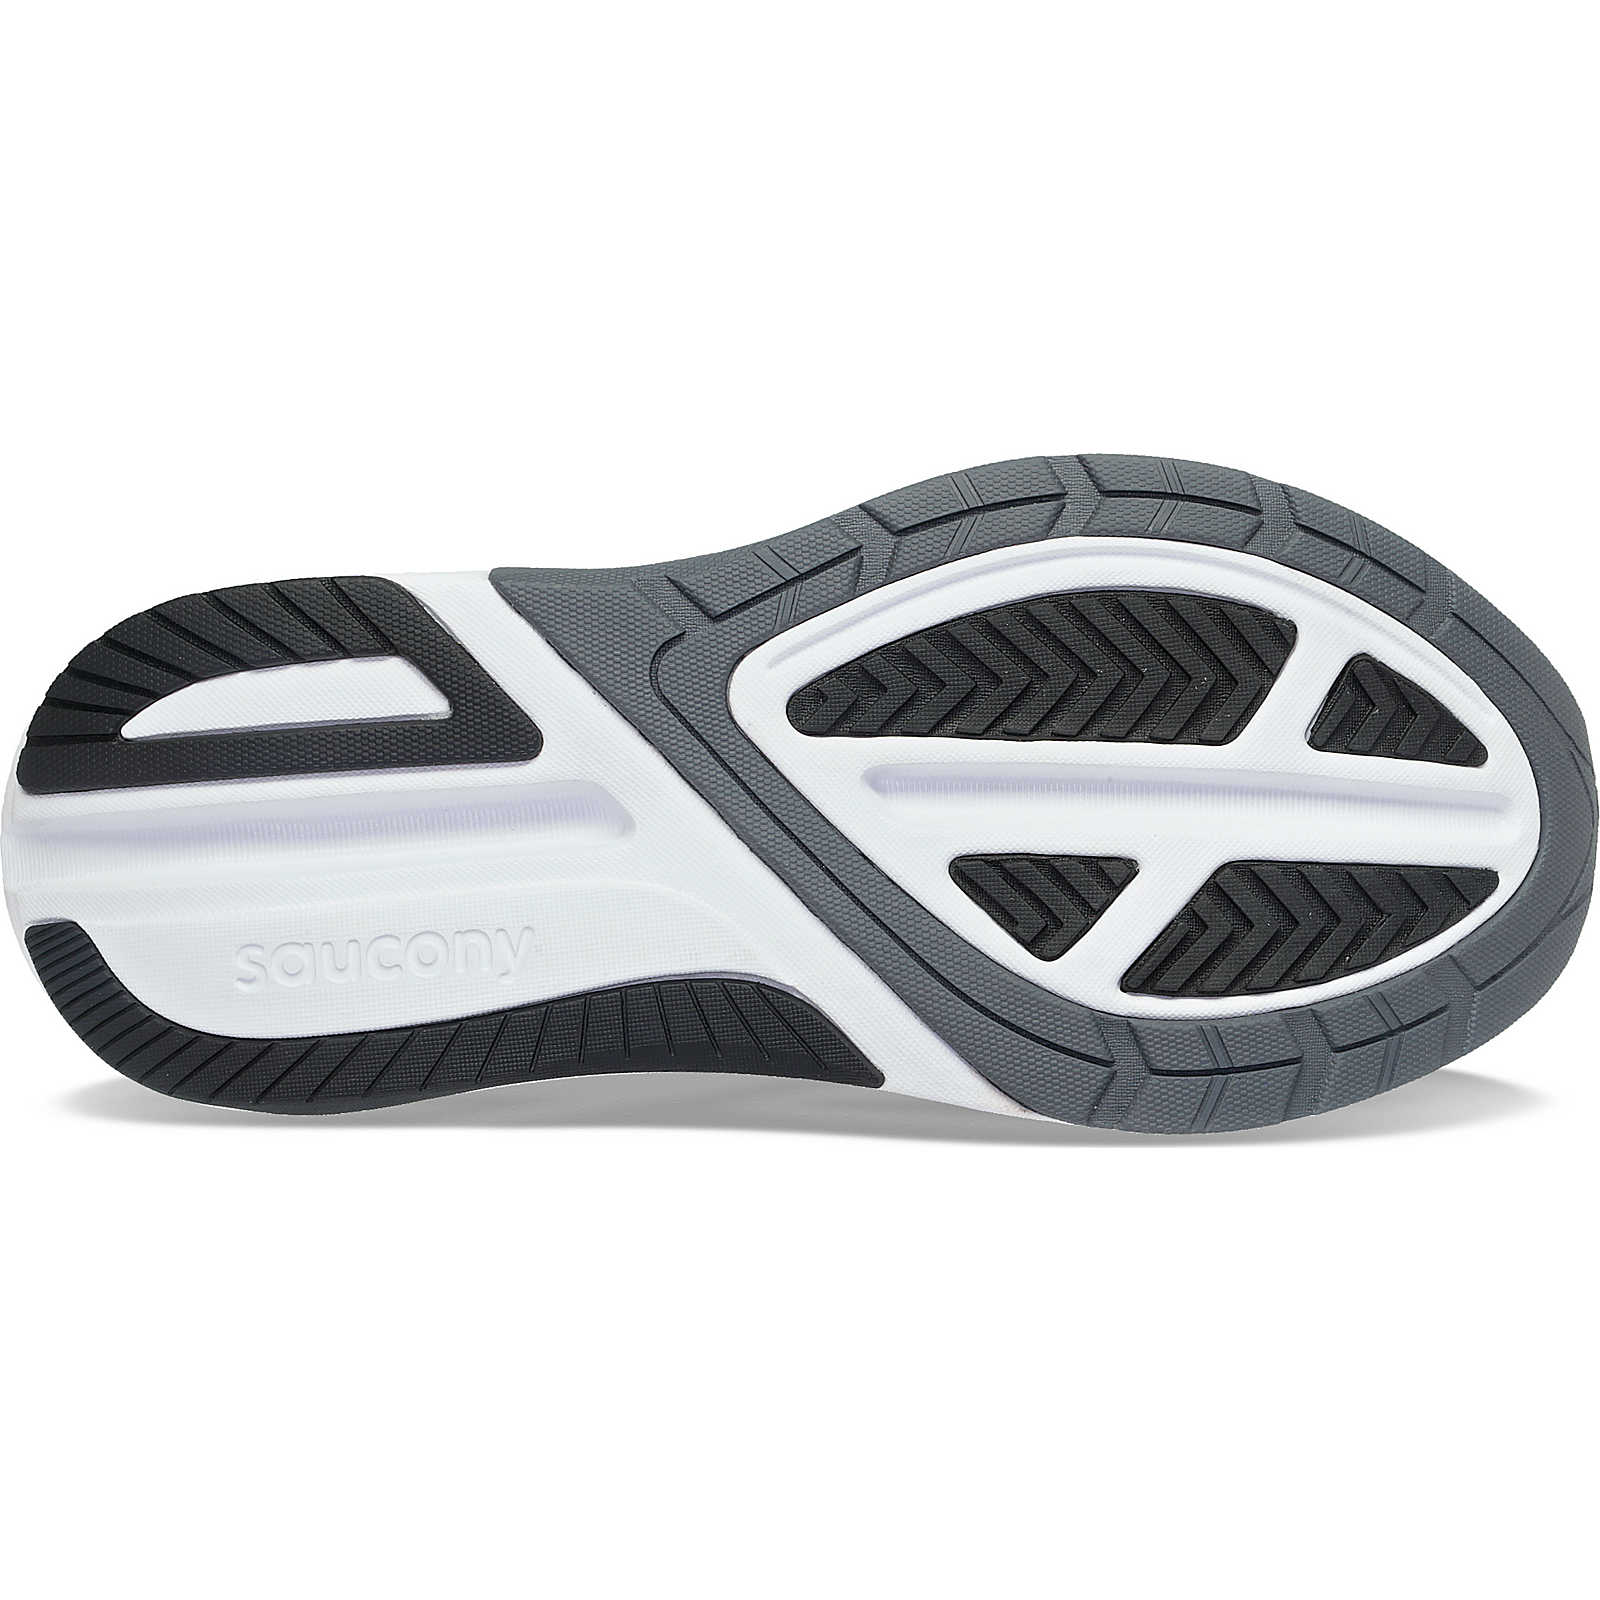 The Saucony Echelon 9 has an outsole that is very straight and it allows insoles to easily fit inside